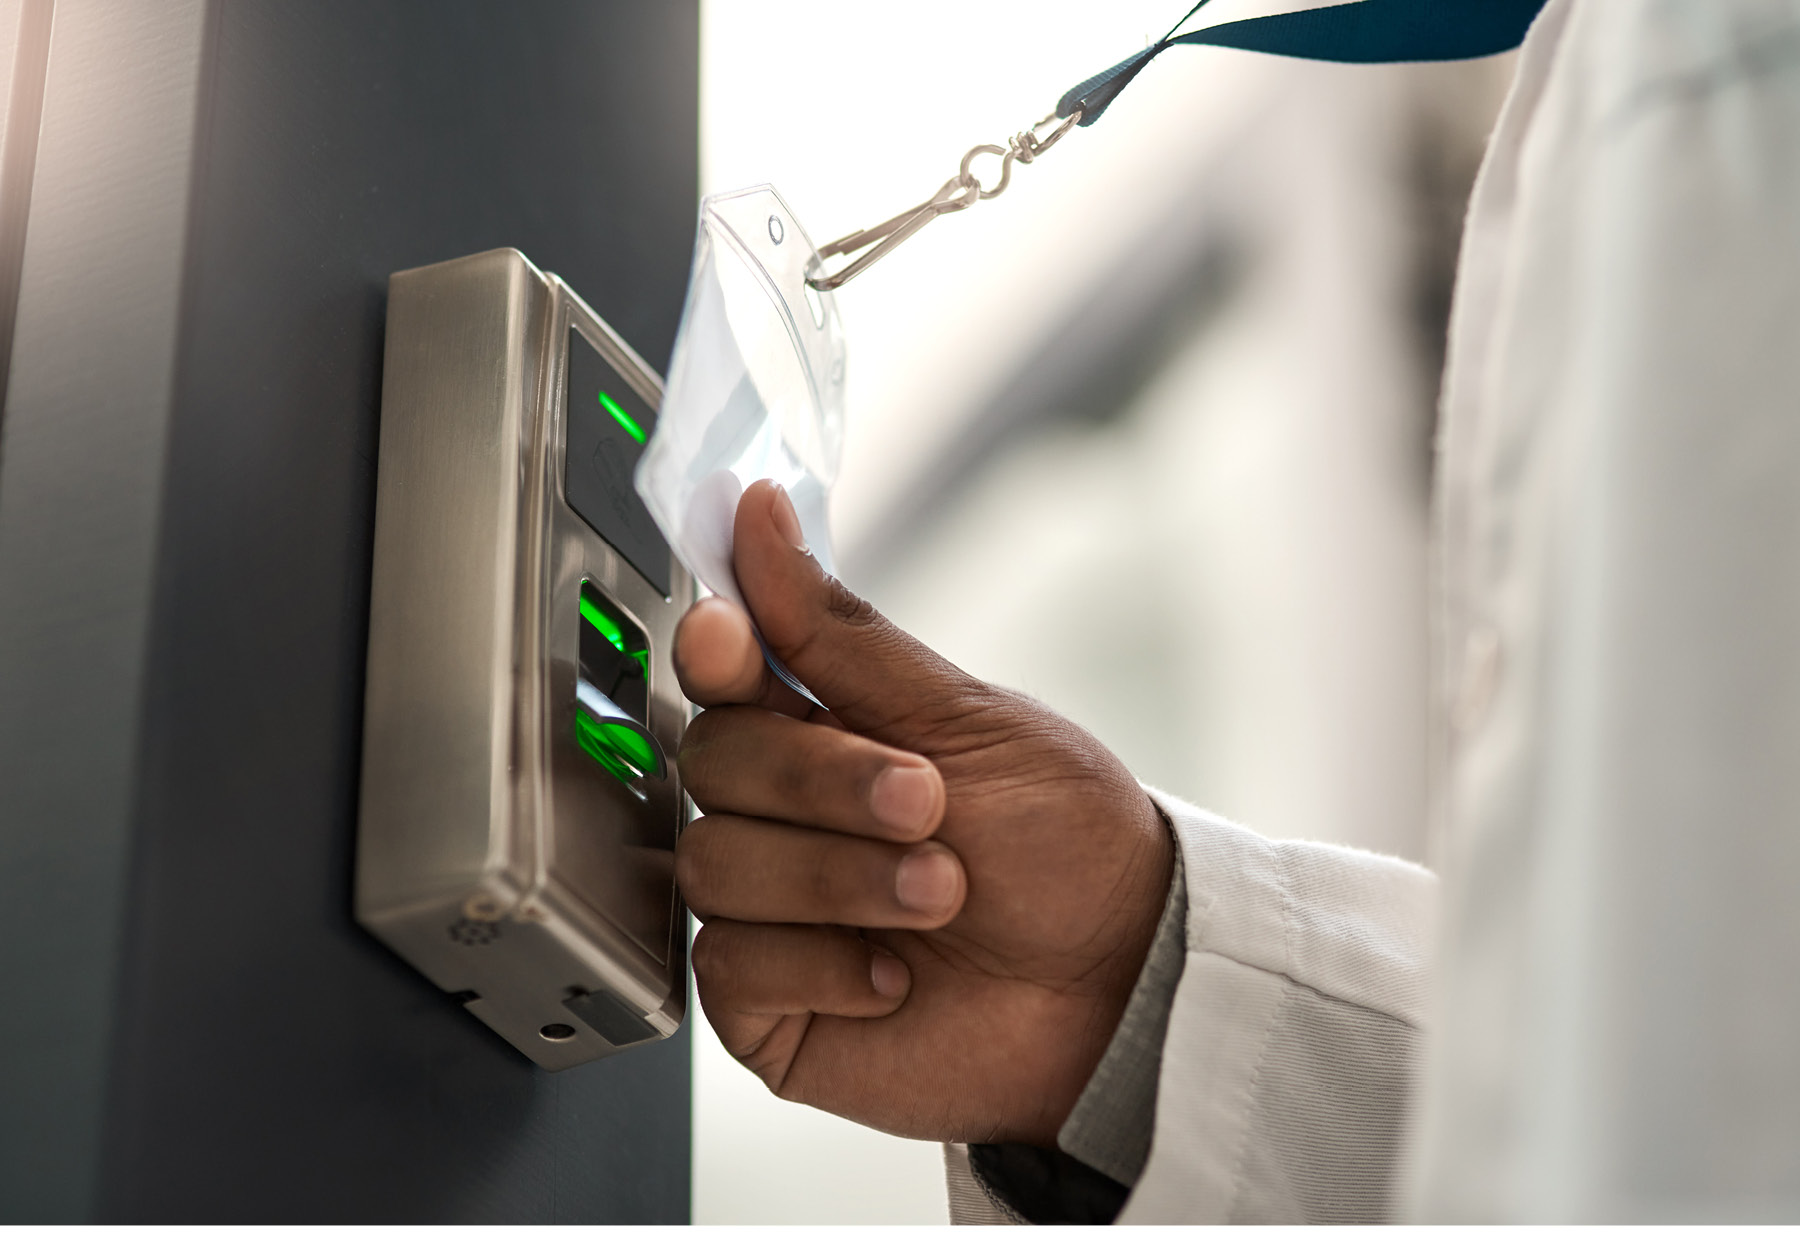 Closeup photo of someone in a lab coat swiping a key card.